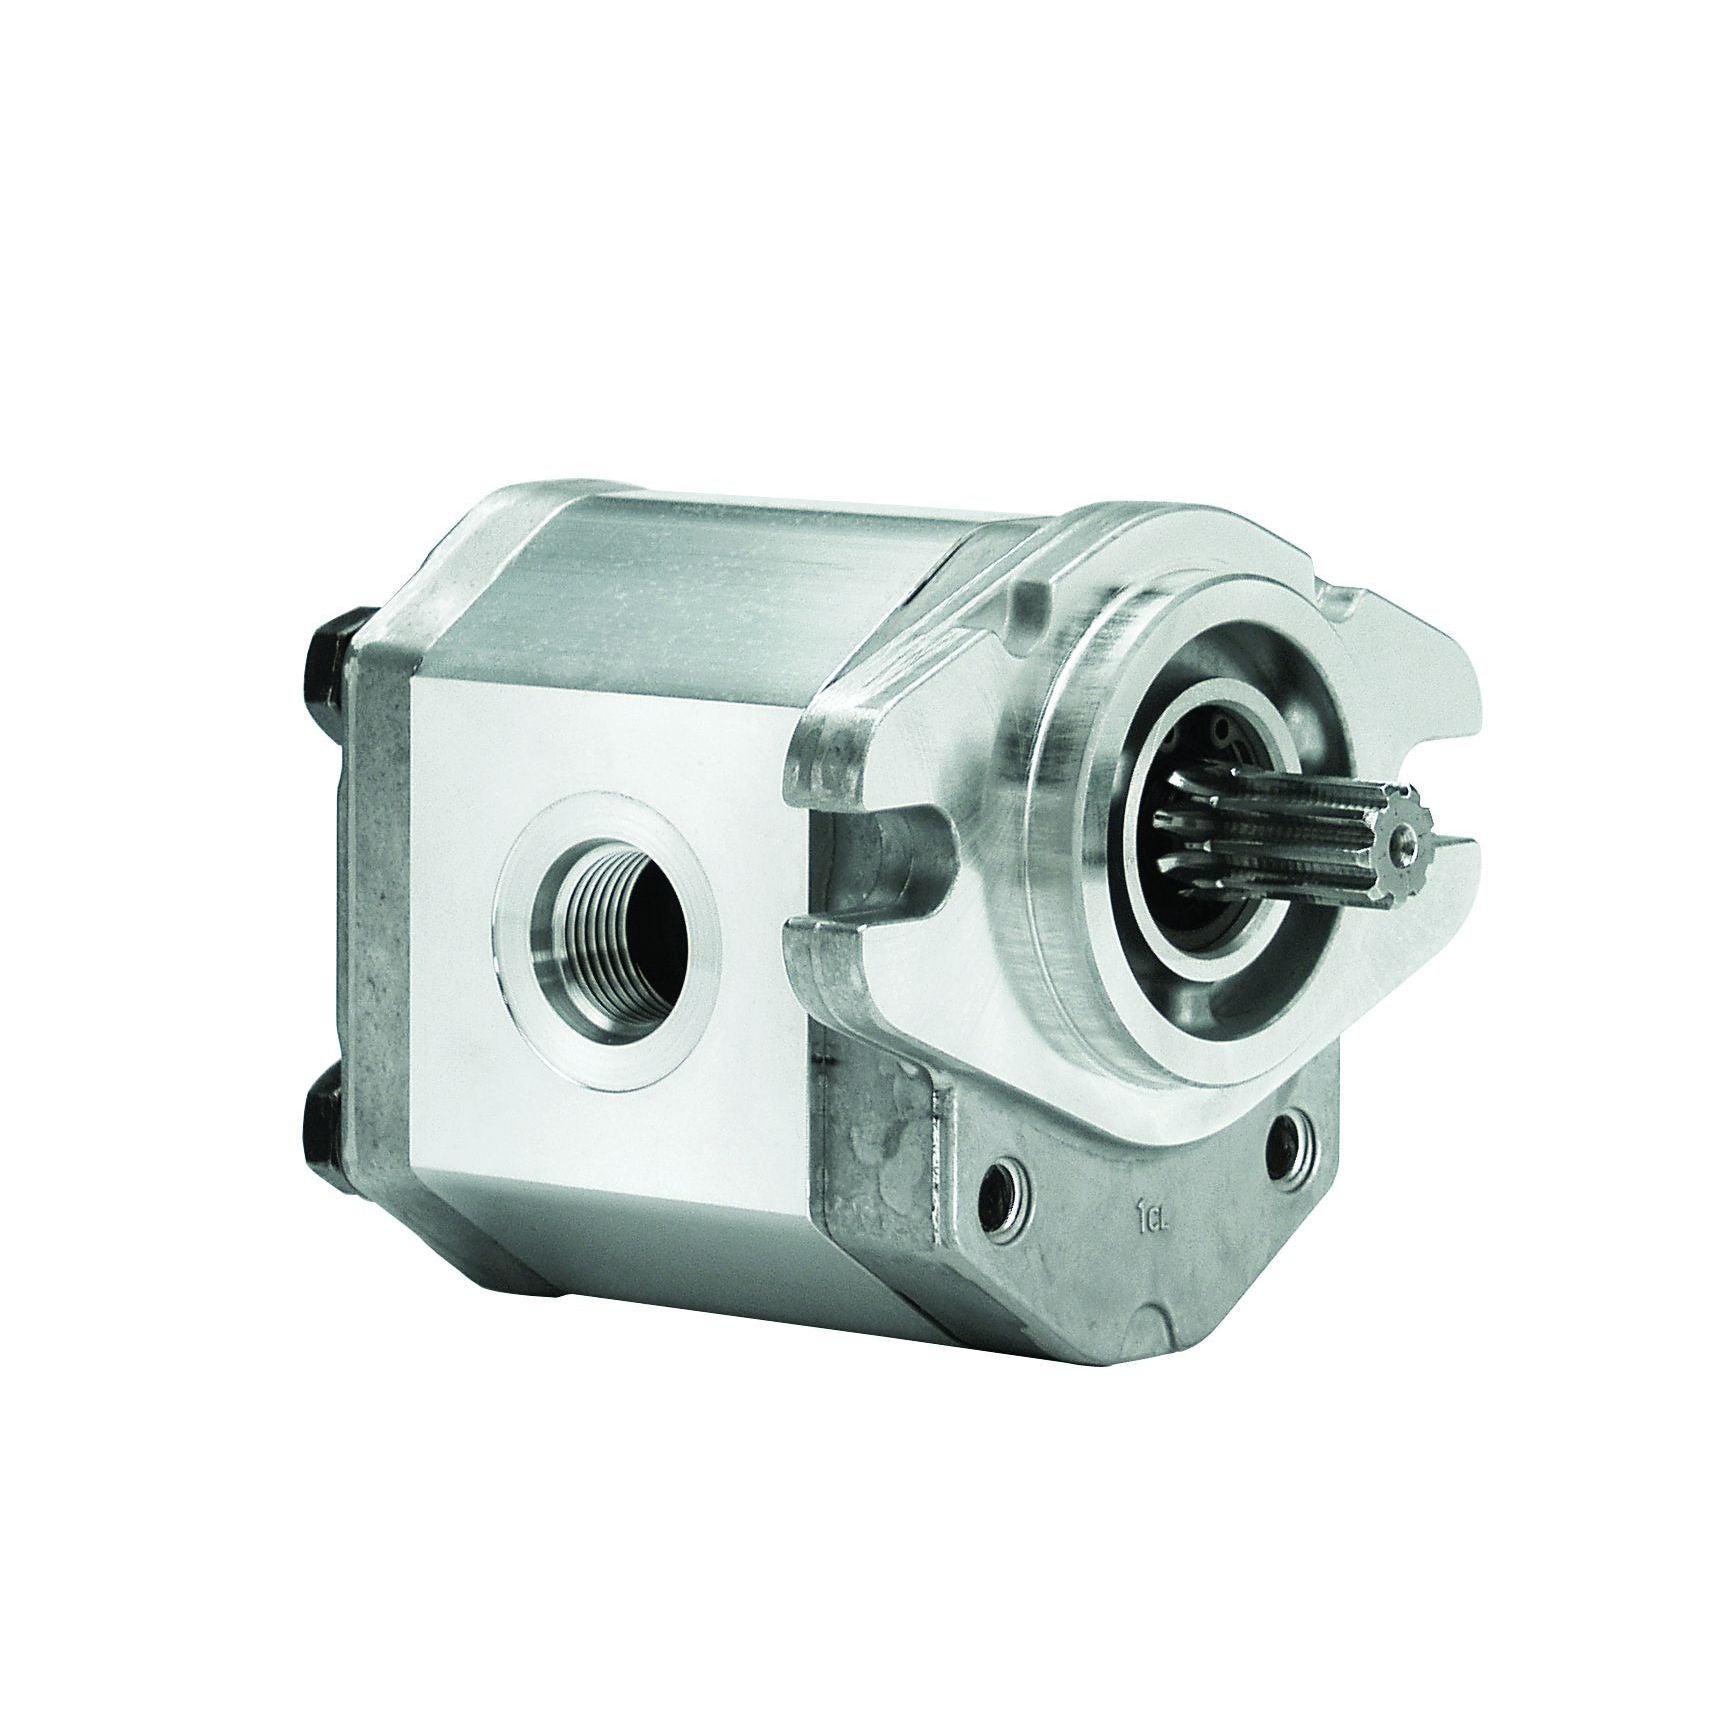 ALP2A-S-40-S1 : Marzocchi Gear Pump, CCW, 28.2cc (1.7202in3), 13.4 GPM, 2465psi, 1800 RPM, #12 SAE (3/4") In, #10 SAE (5/8") Out, Splined Shaft 9T 16/32DP, SAE A 2-Bolt Mount